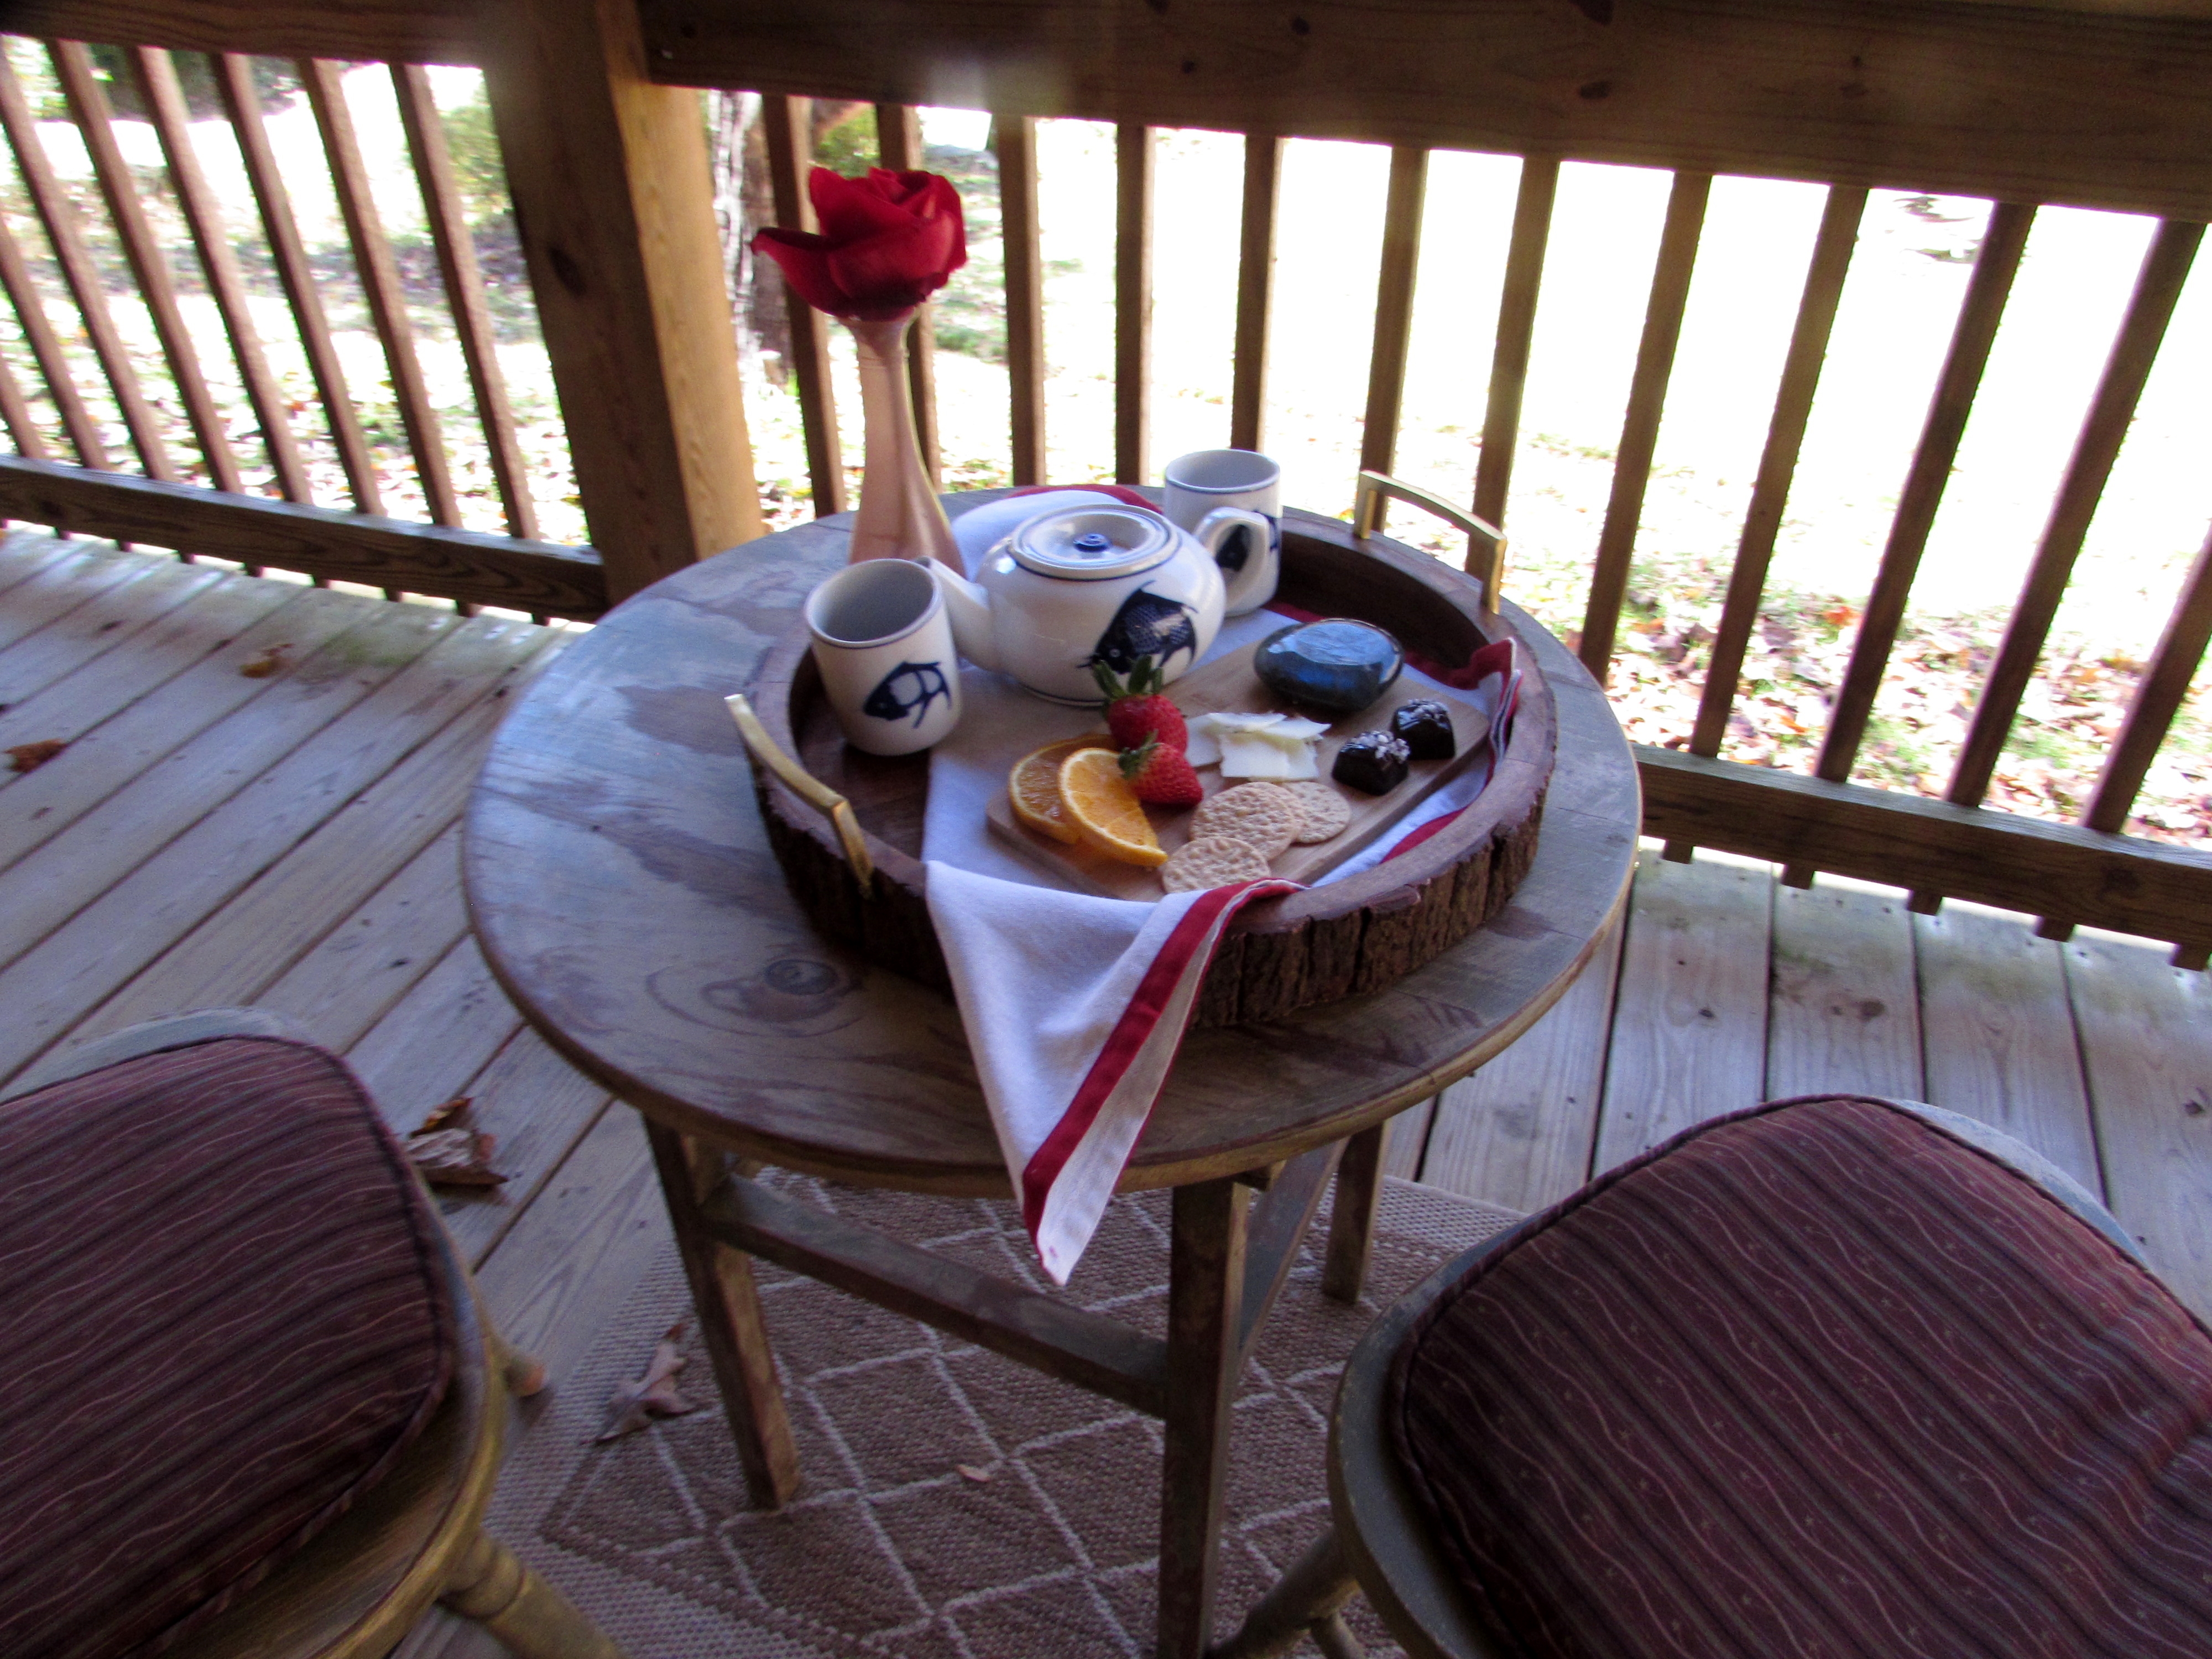 The front porch is a great place for tea